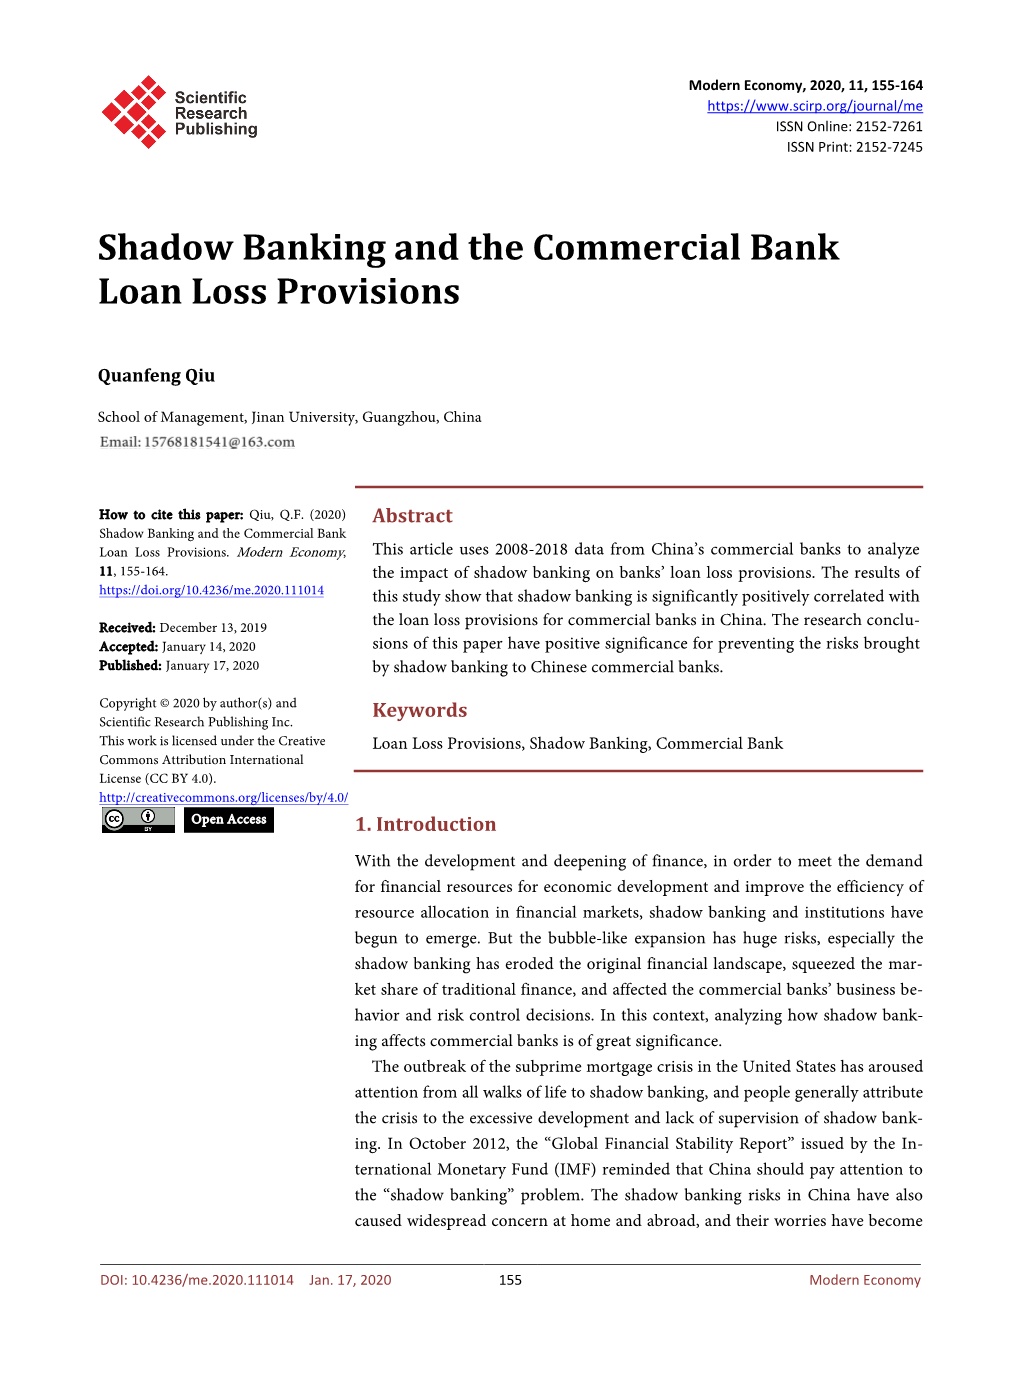 Shadow Banking and the Commercial Bank Loan Loss Provisions